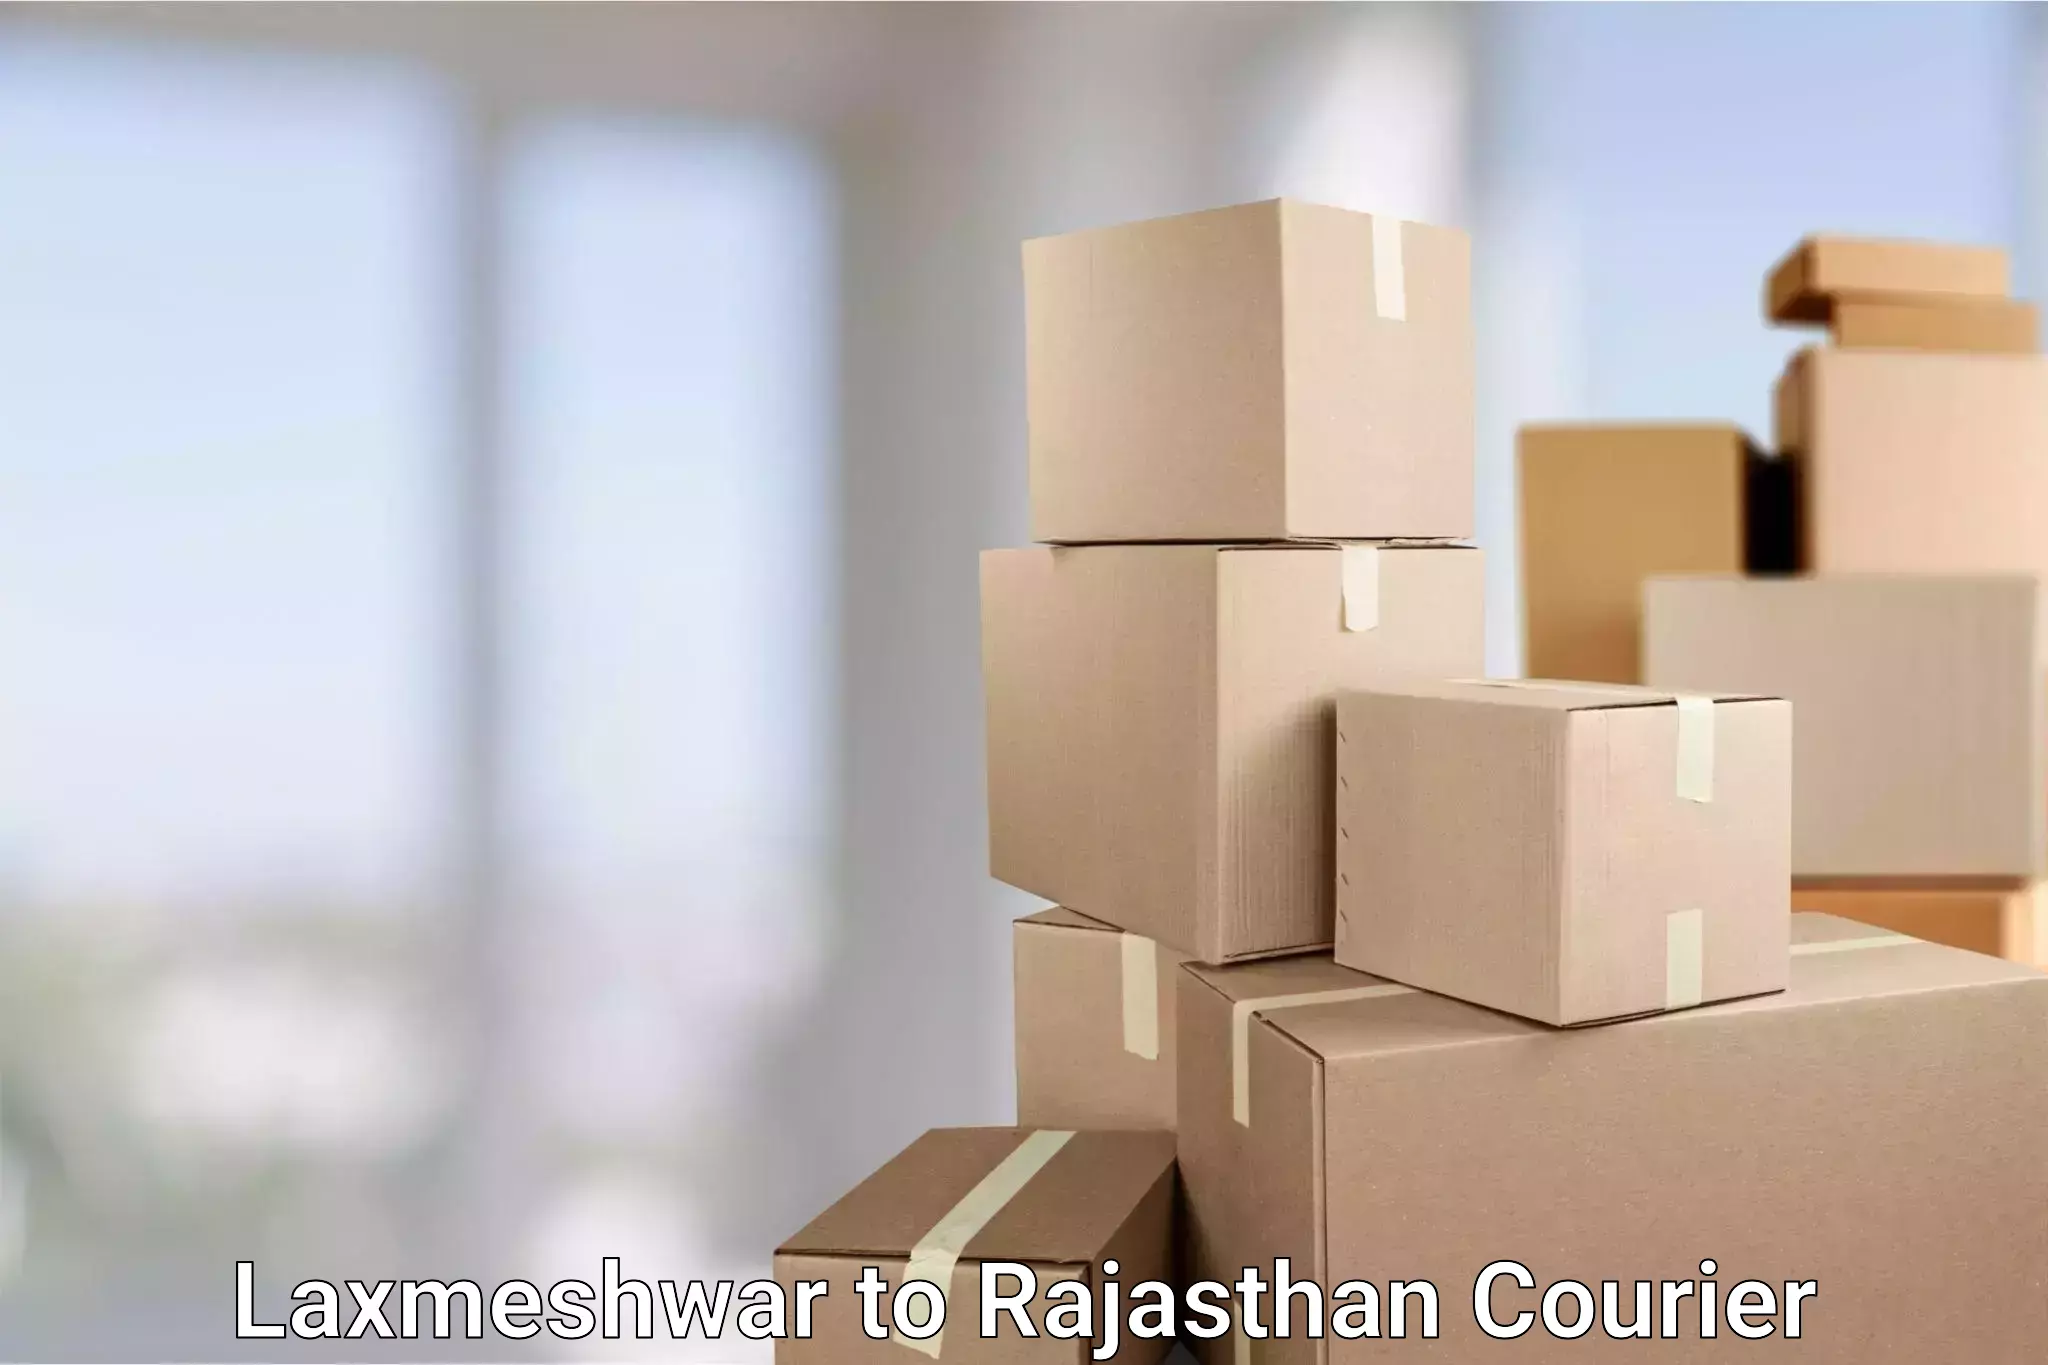 Global courier networks Laxmeshwar to Rajasthan